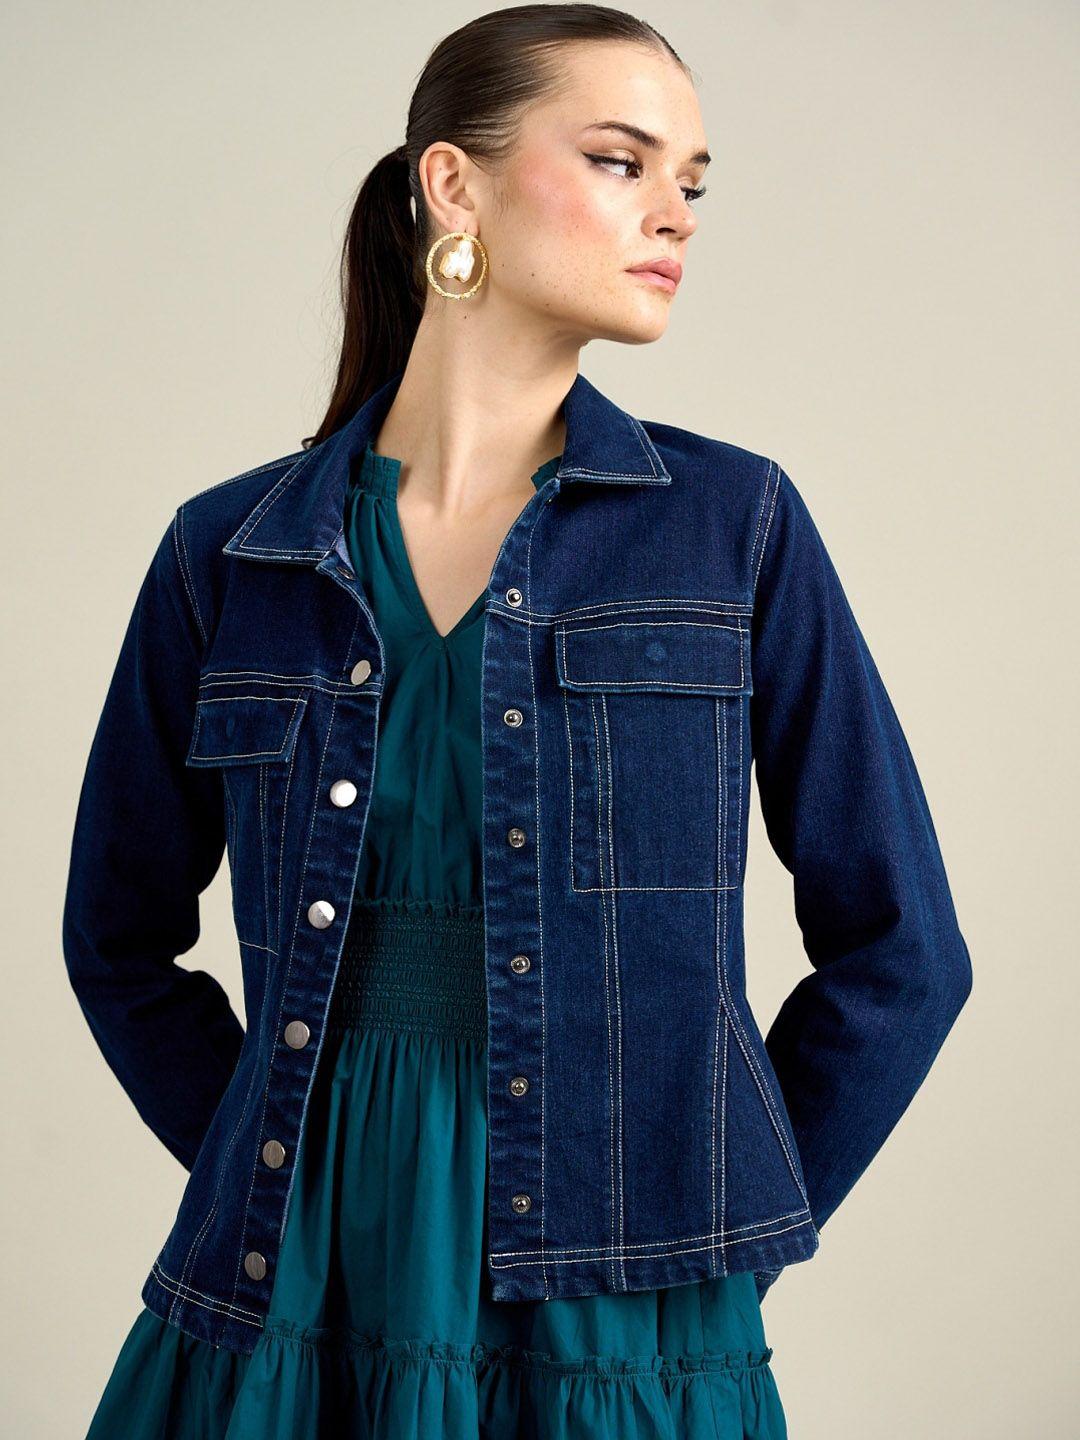 style island embroidered spread collar long sleeves denim jacket